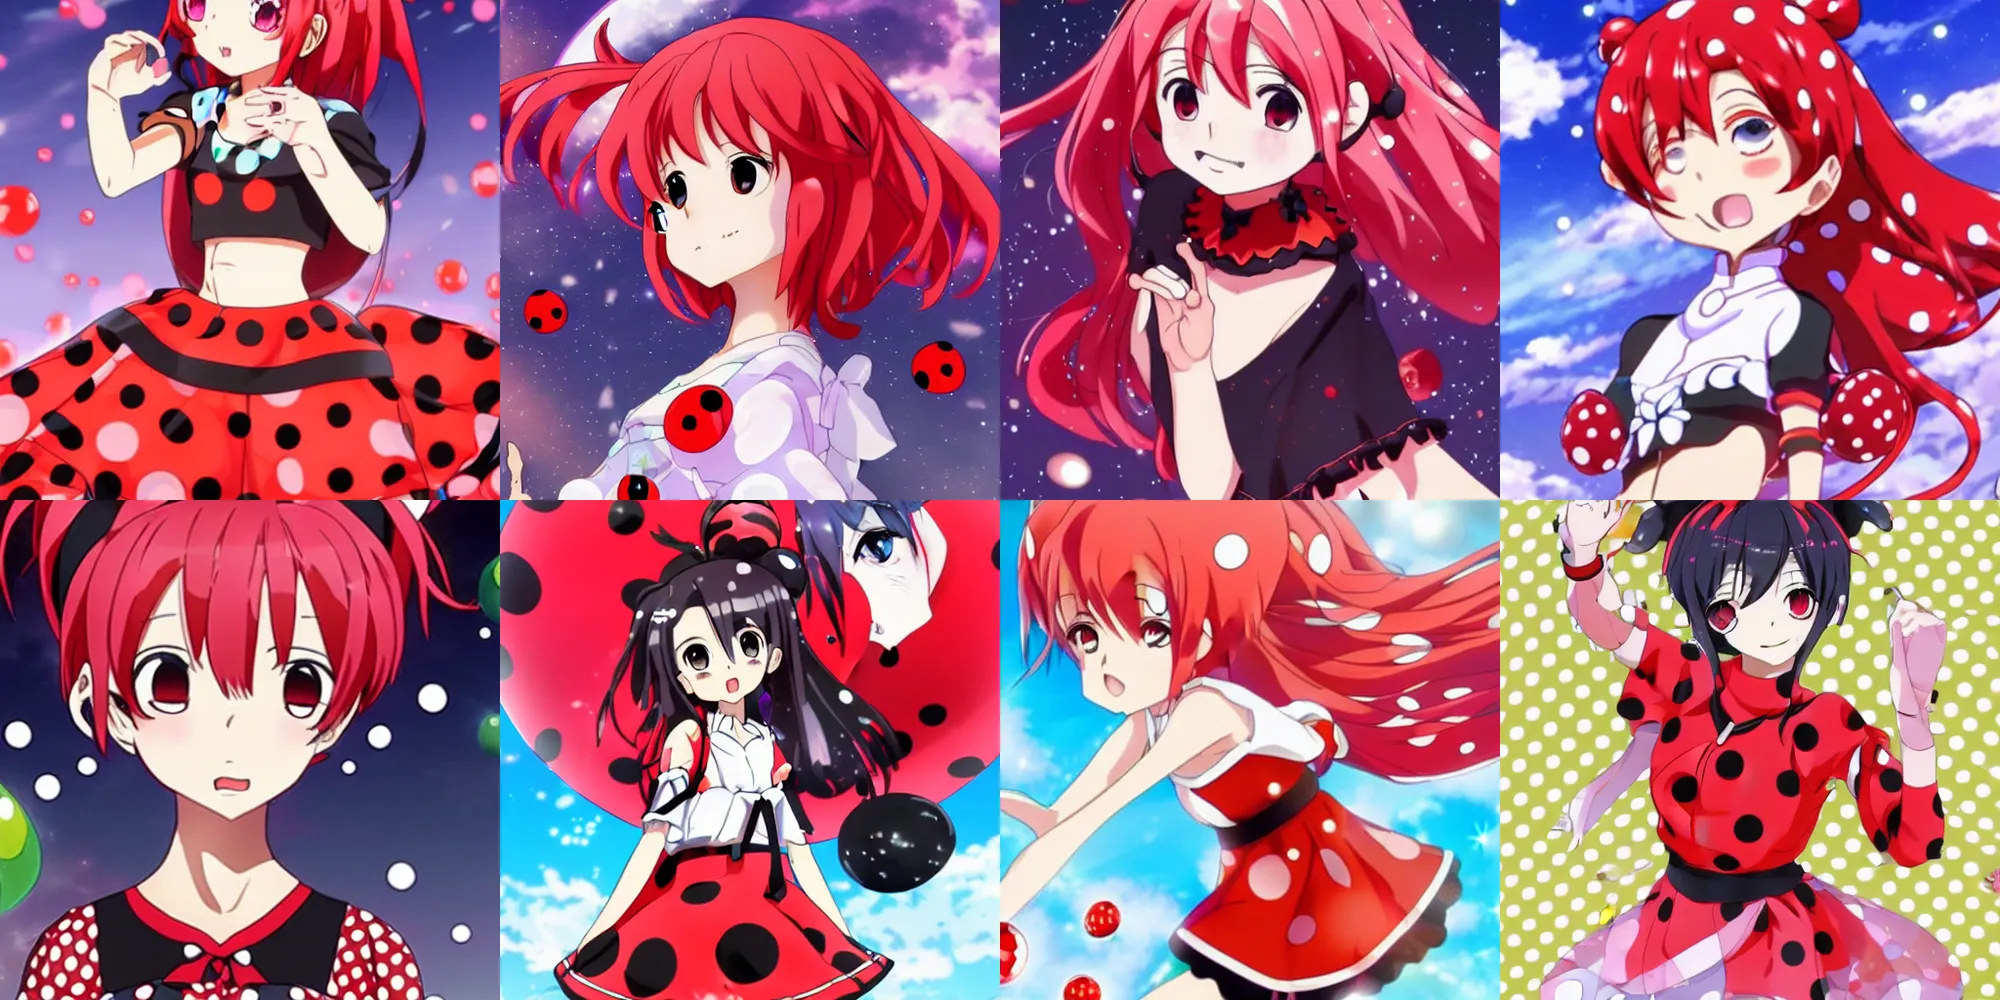 Prompt: anime key visual of a ladybug gijinka with red hair and space buns wearing a polka dot top and black skirt, vshojo, hololive